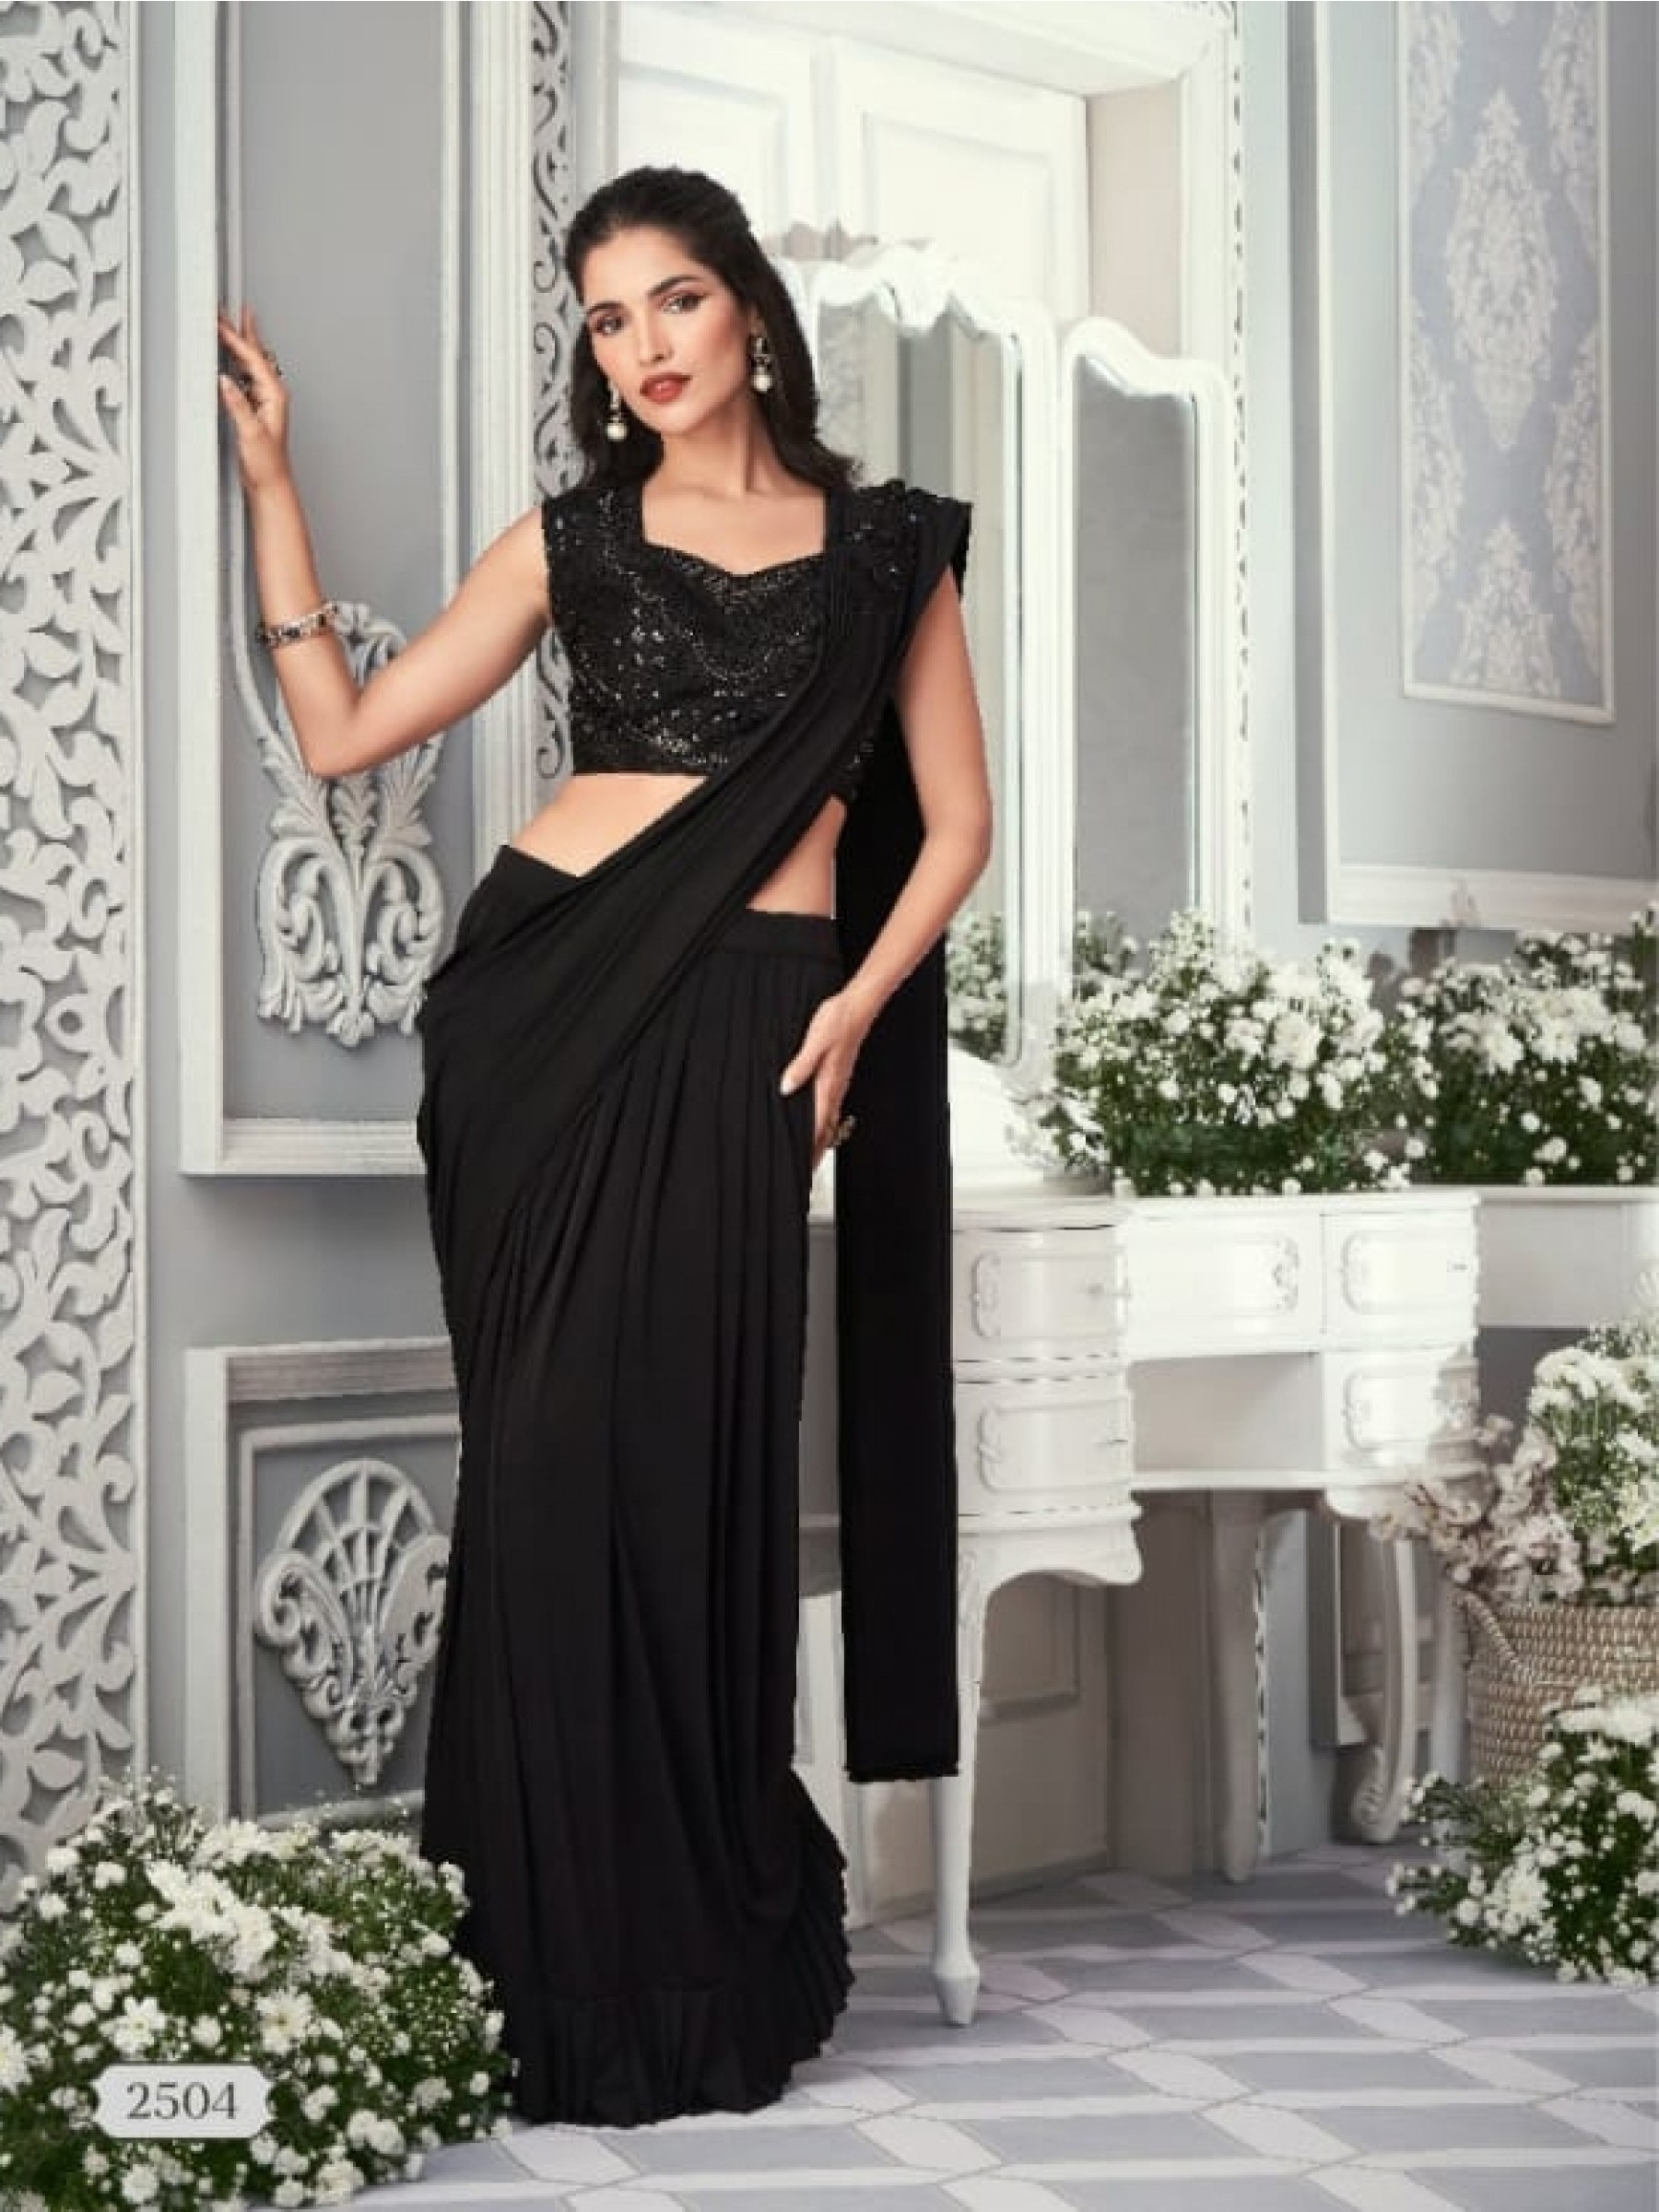 Laycra Party Wear Saree In Black Color With Embroidery Work